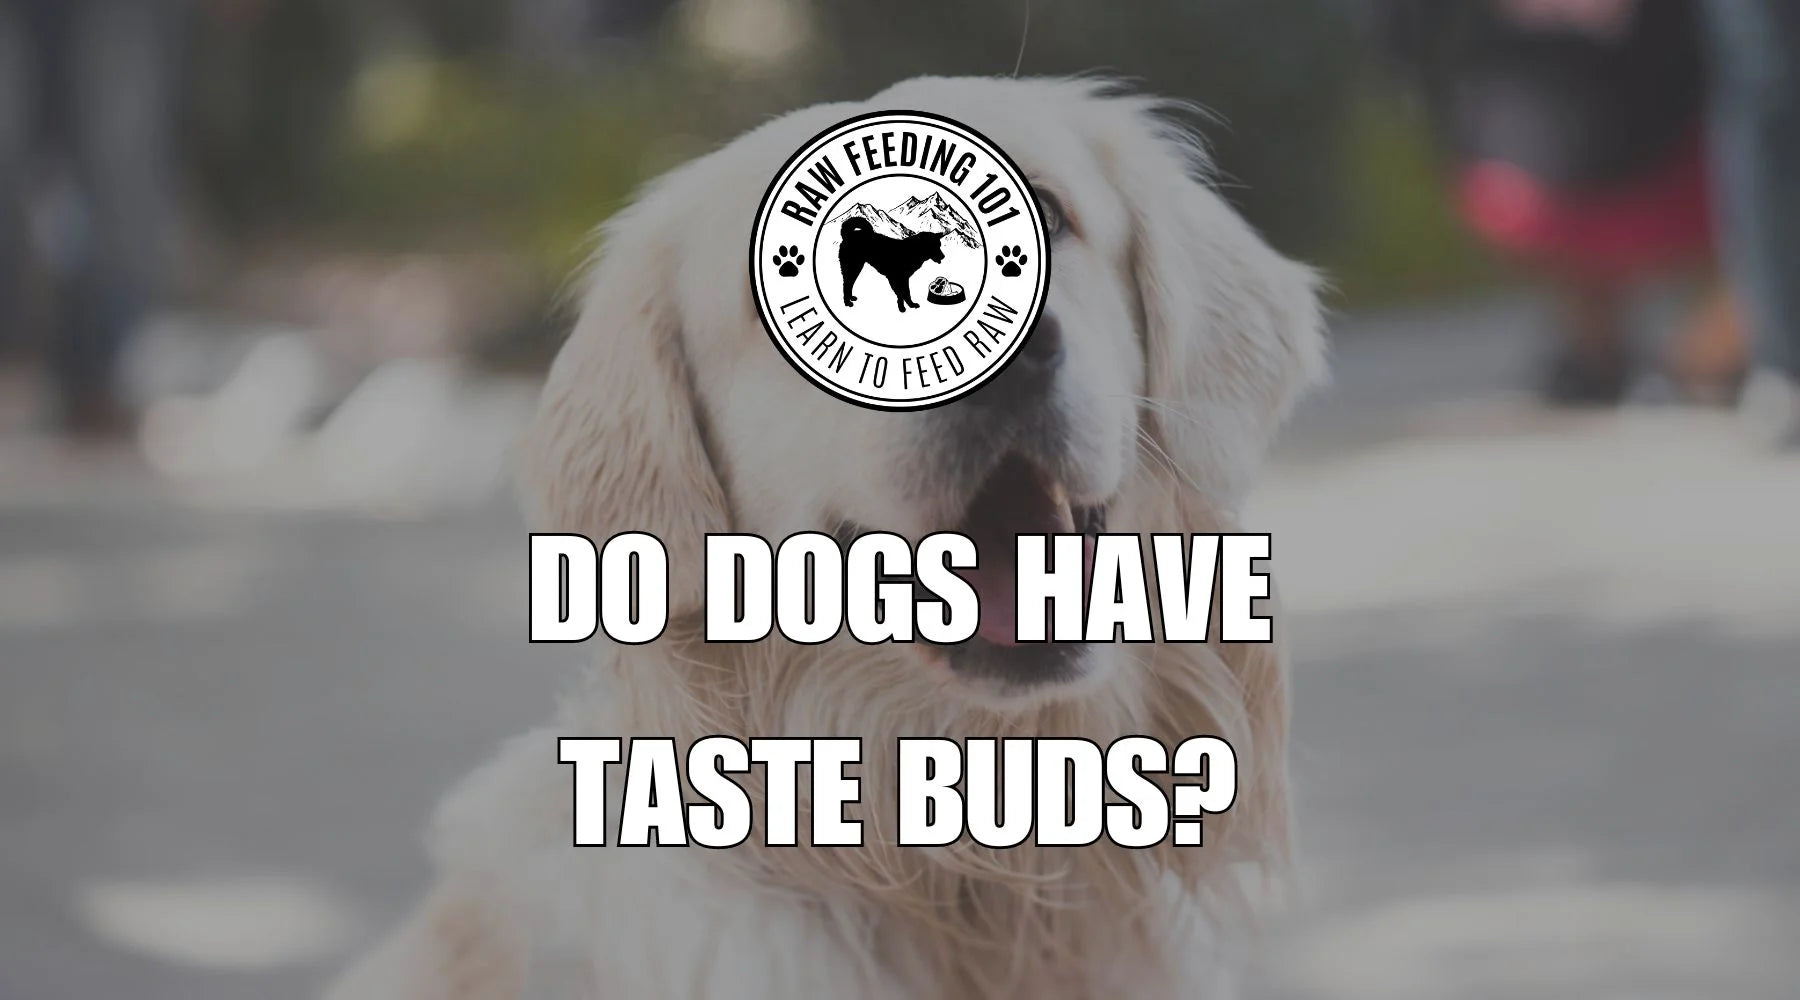 Dog's taste buds: does it like your food?